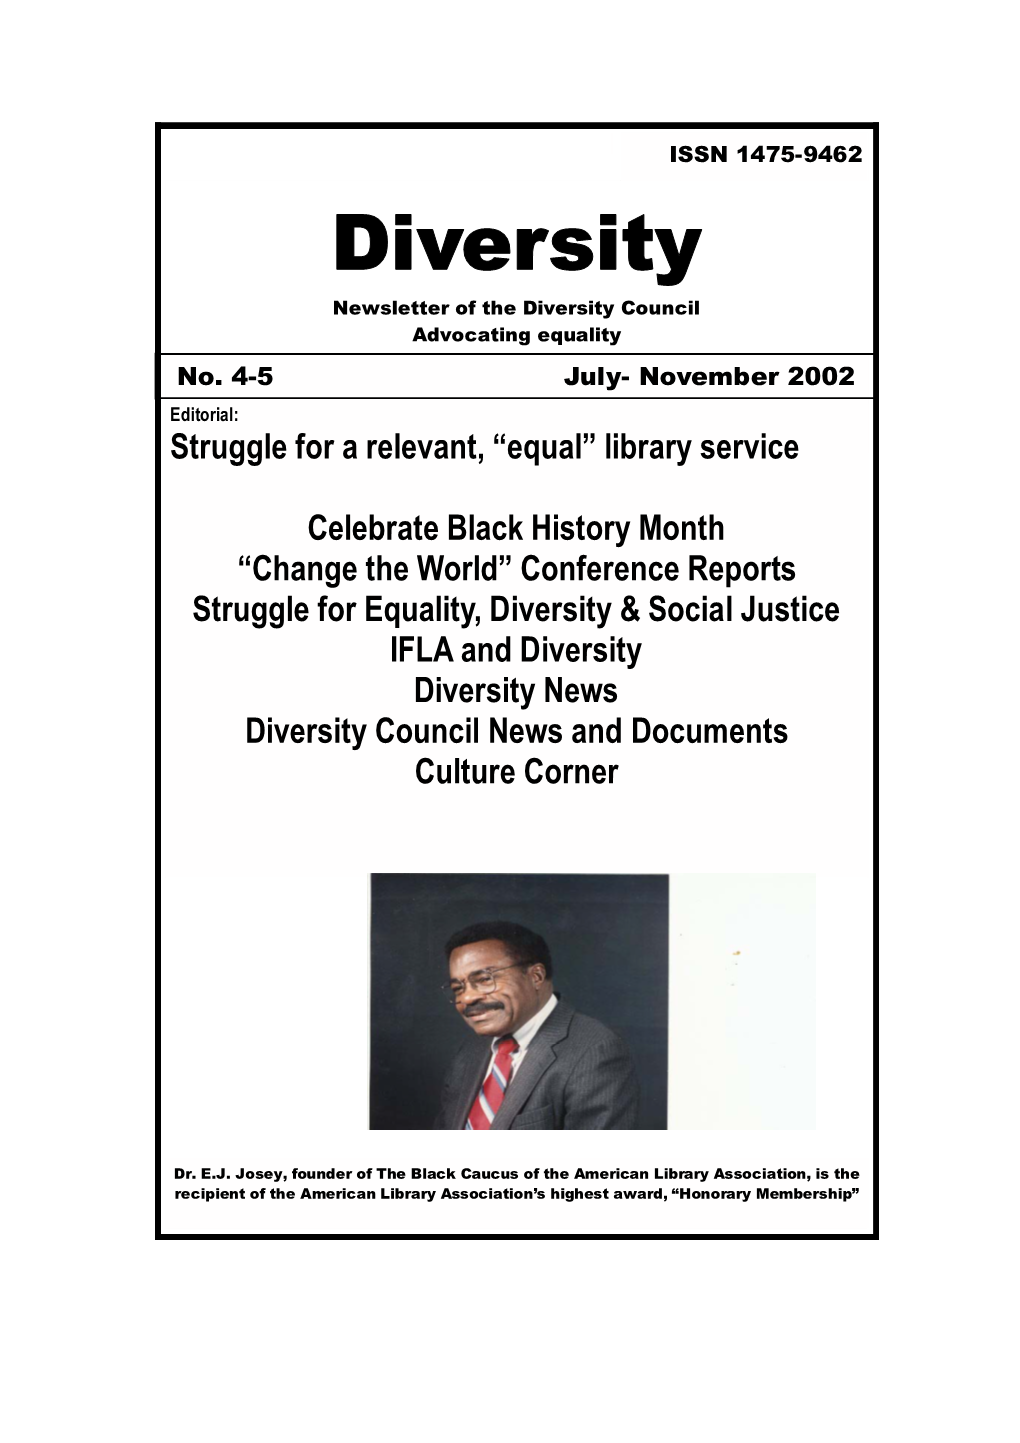 Diversity Newsletter of the Diversity Council Advocating Equality No